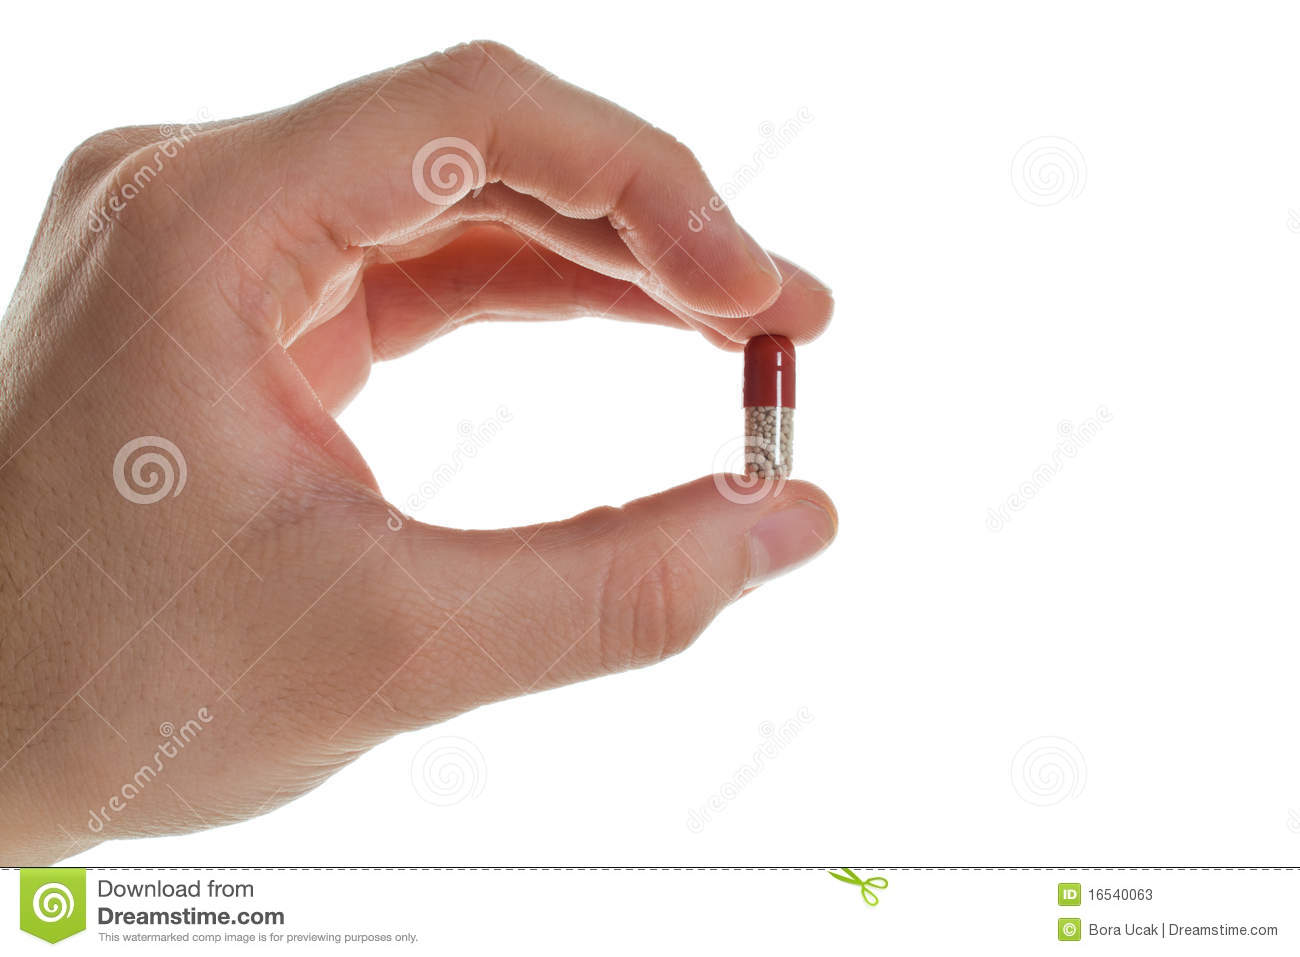 Medical Pill In Hand Stock Photos   Image  16540063